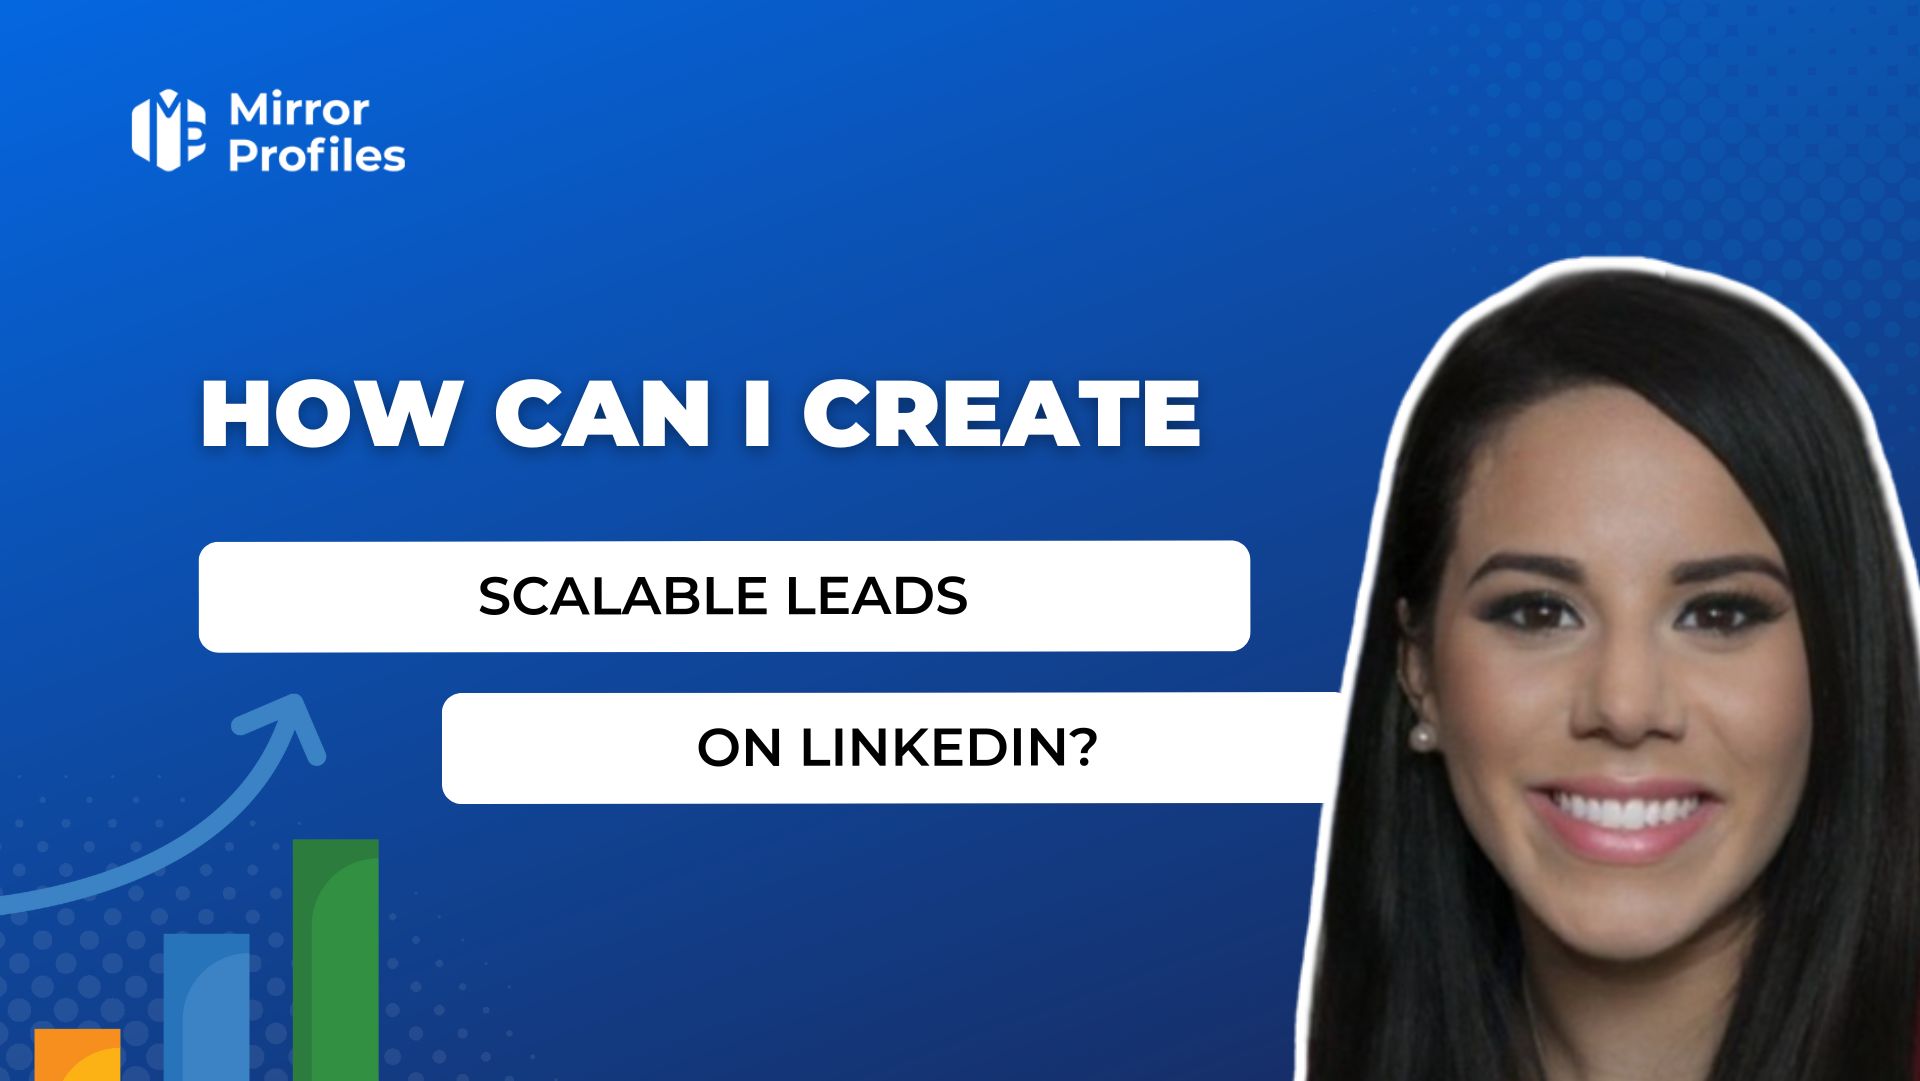 How can I create scalable leads on Linkedin?